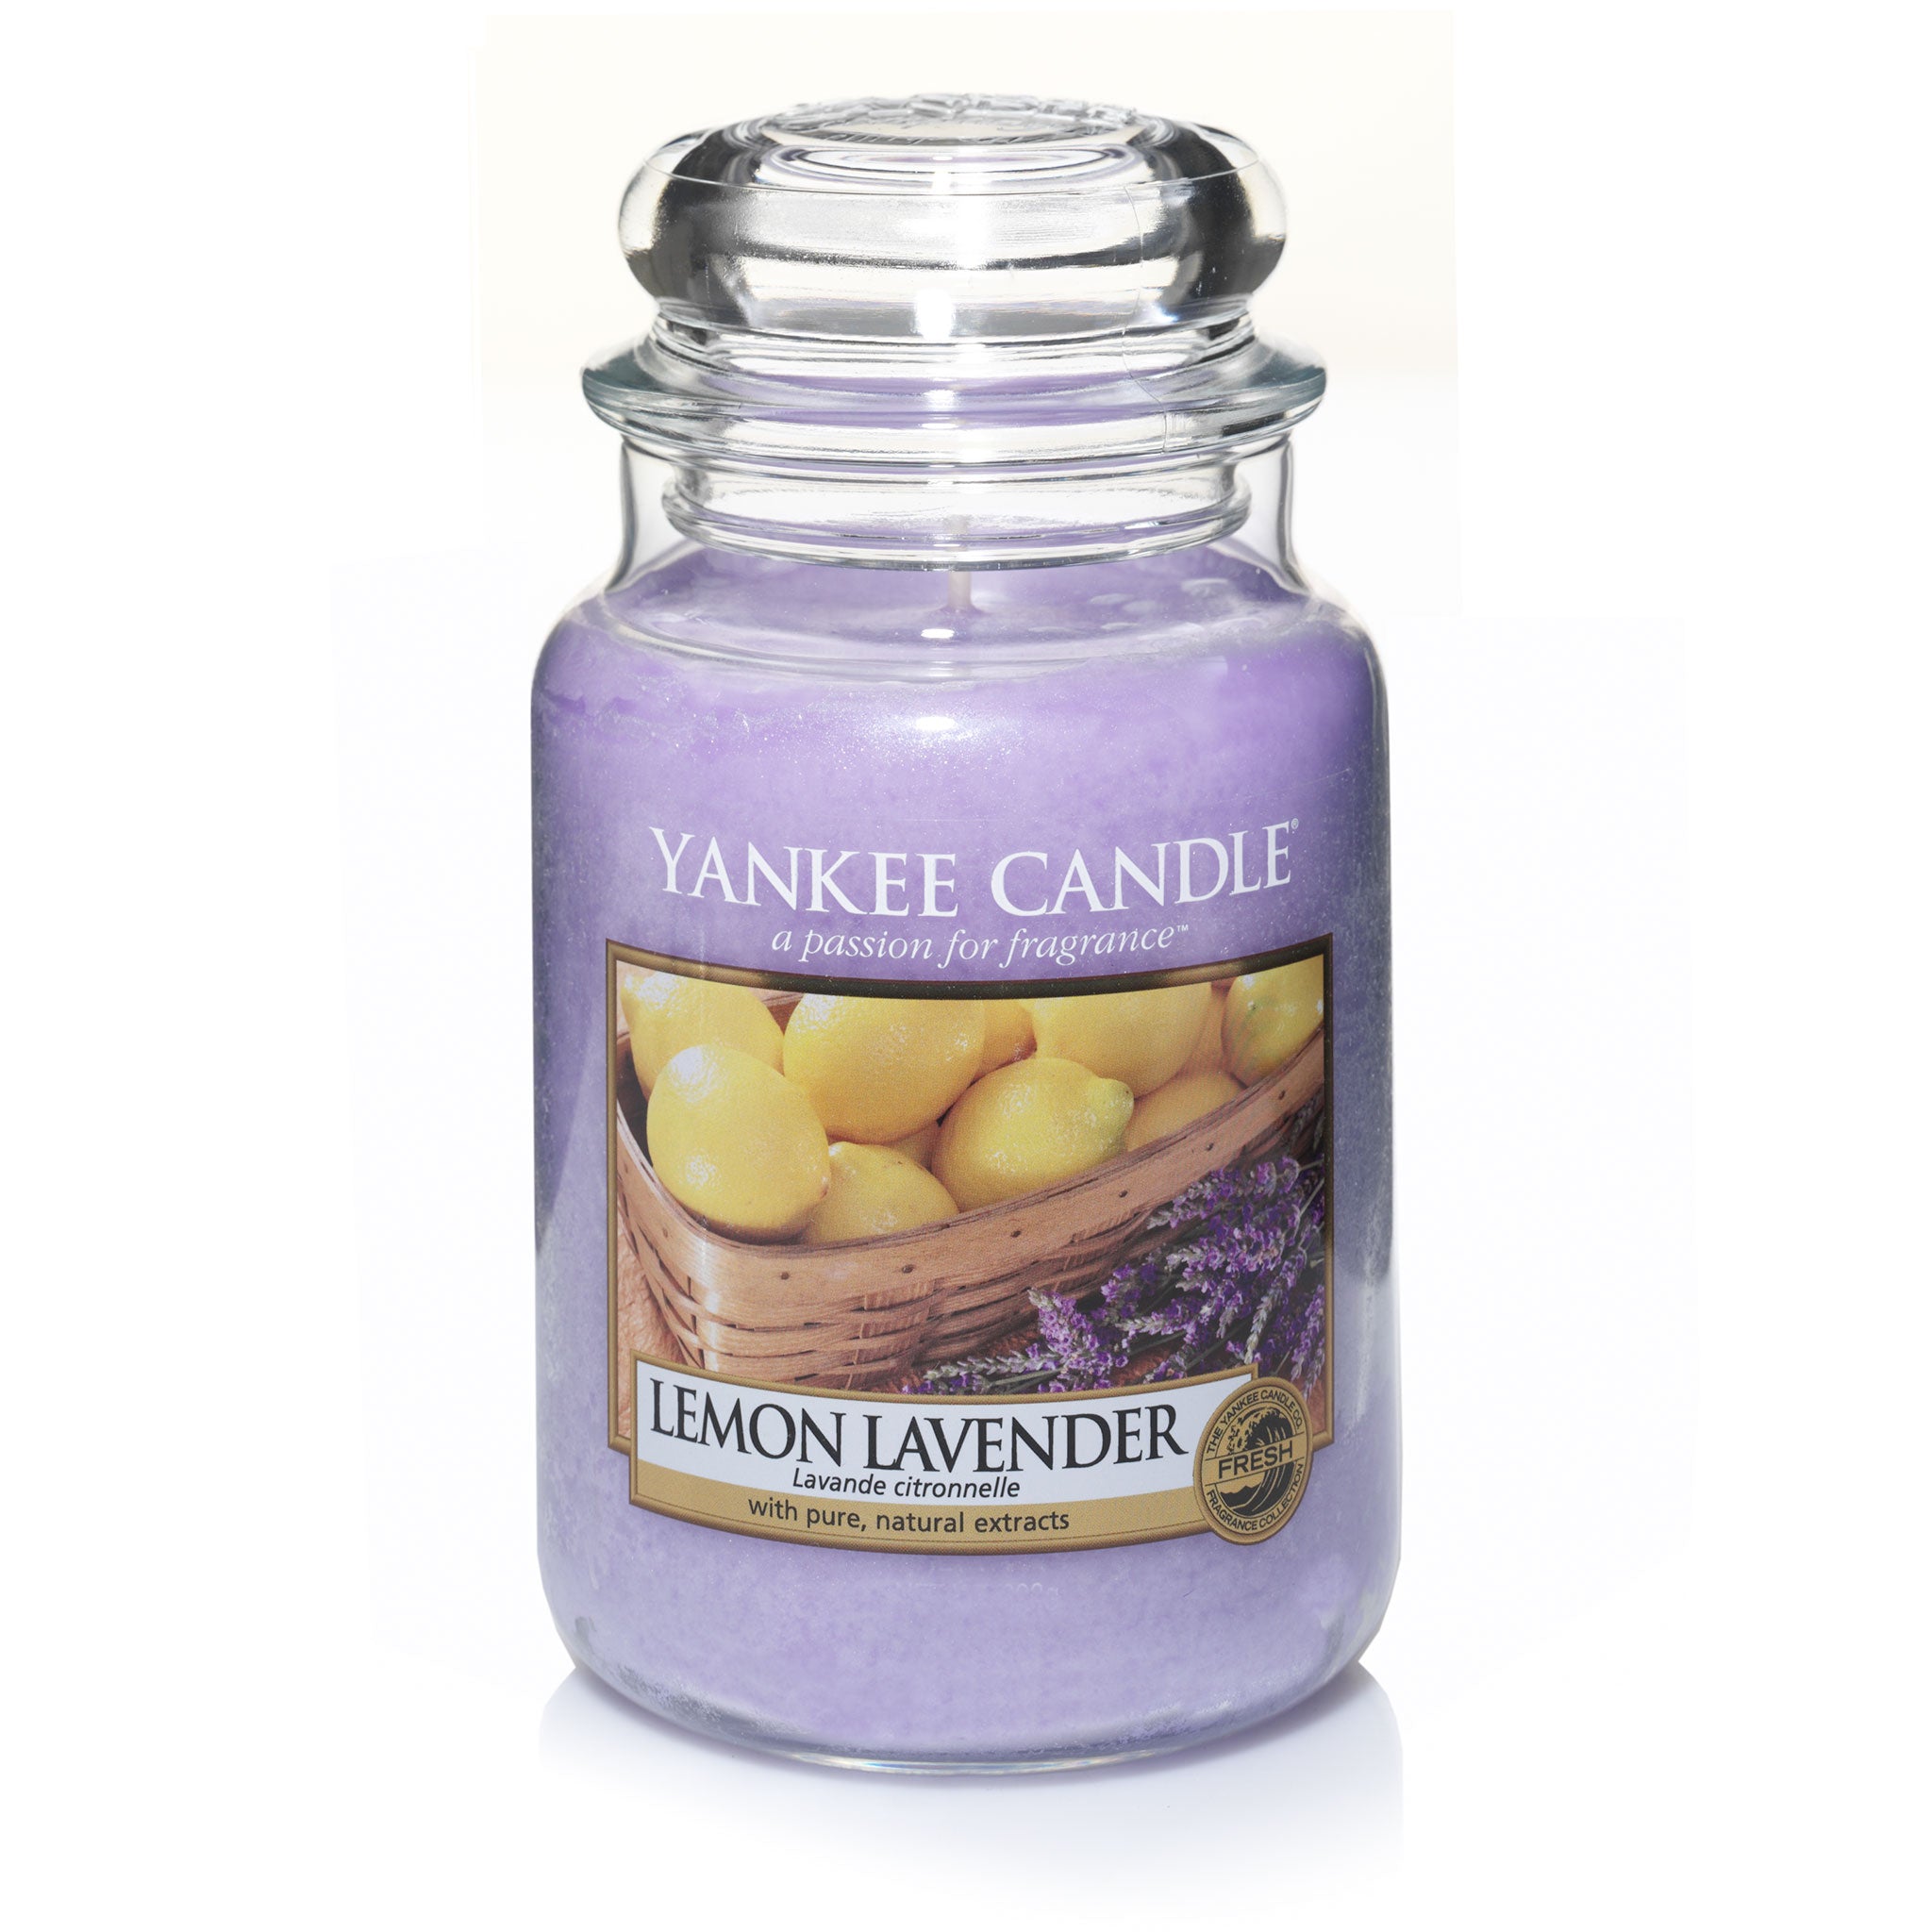 LEMON LAVENDER -Yankee Candle- Giara Grande – Candle With Care